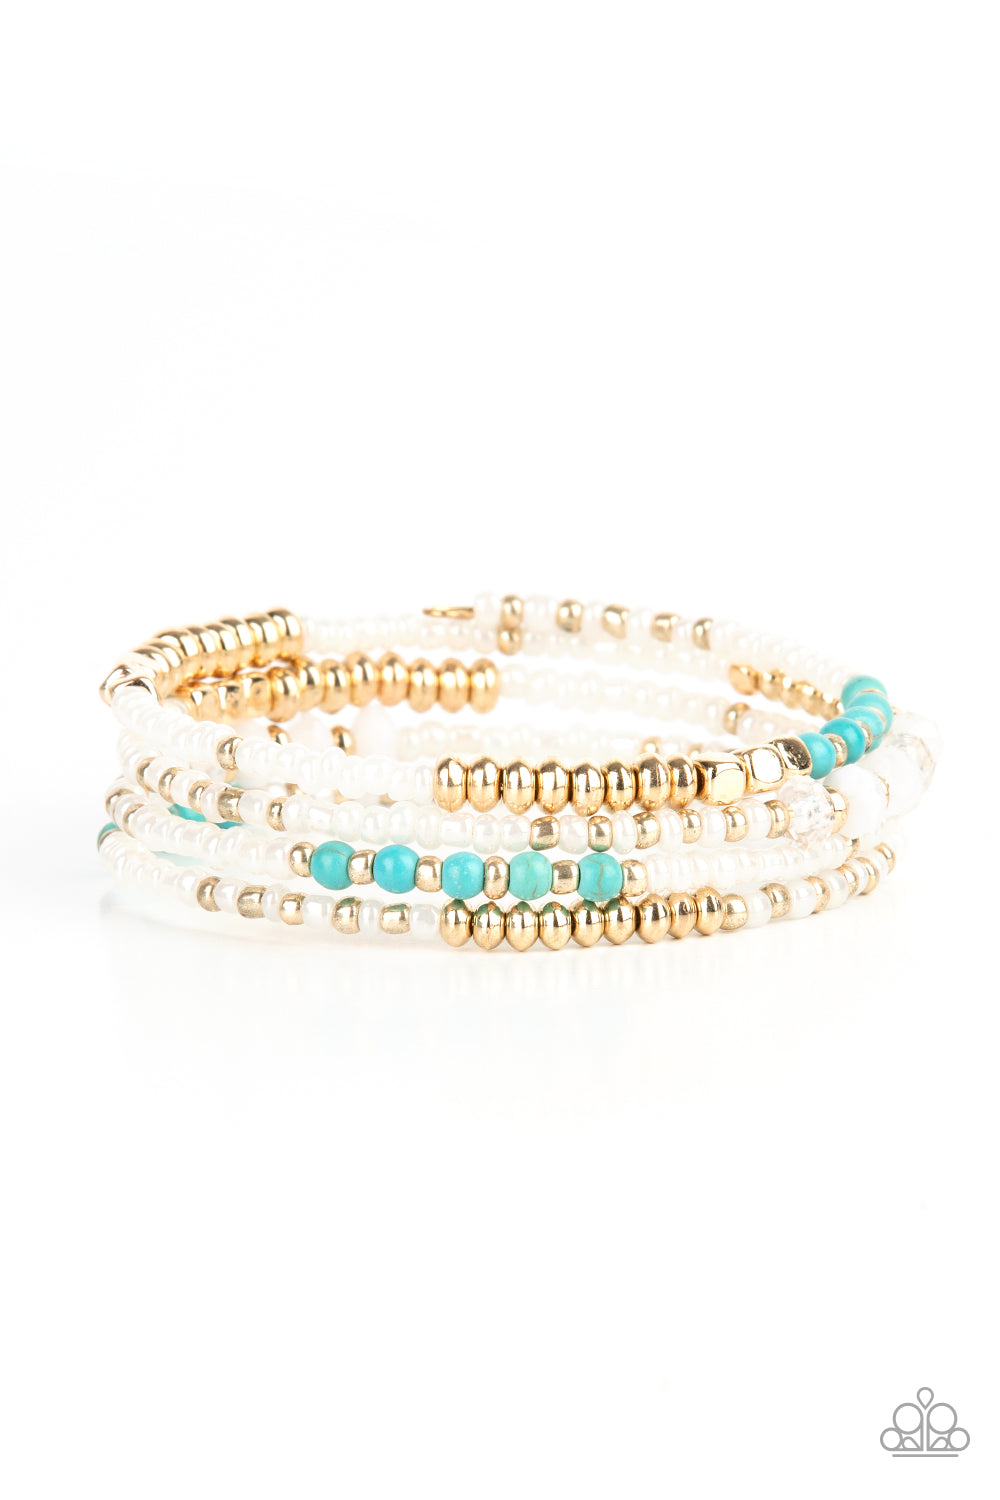 Sections of pearly white seed beads alternate with gold, turquoise, and crystal-like beads in infinite rows. The dreamy colors are threaded along a continuous strand of wire for an infinity wrap-style bracelet around the wrist.